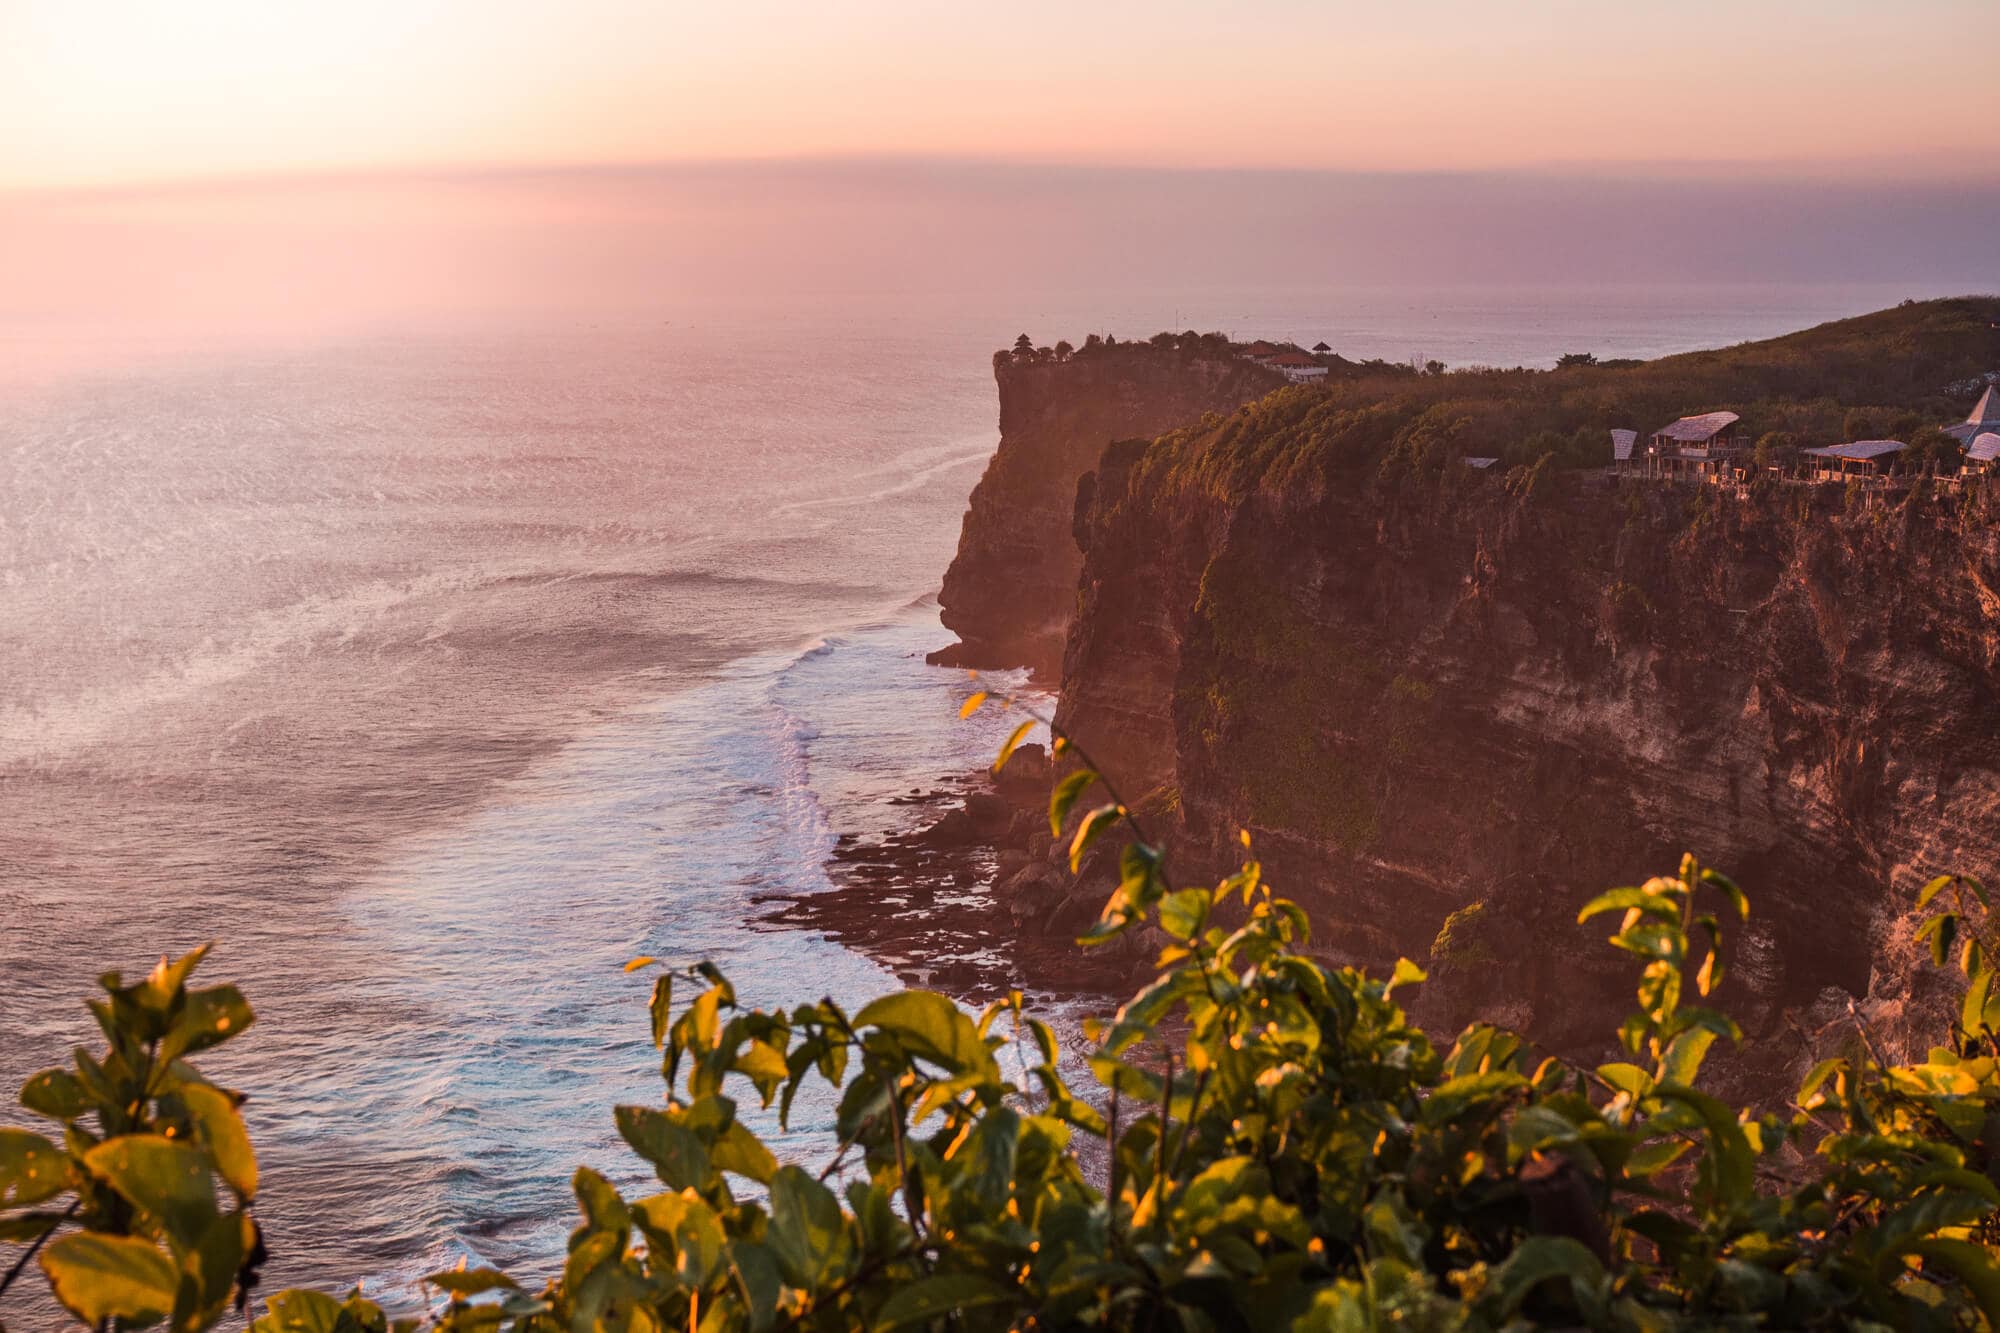 View of the Uluwatu Cliffs from Karang Boma Cliff viewpoint at sunset in Bali